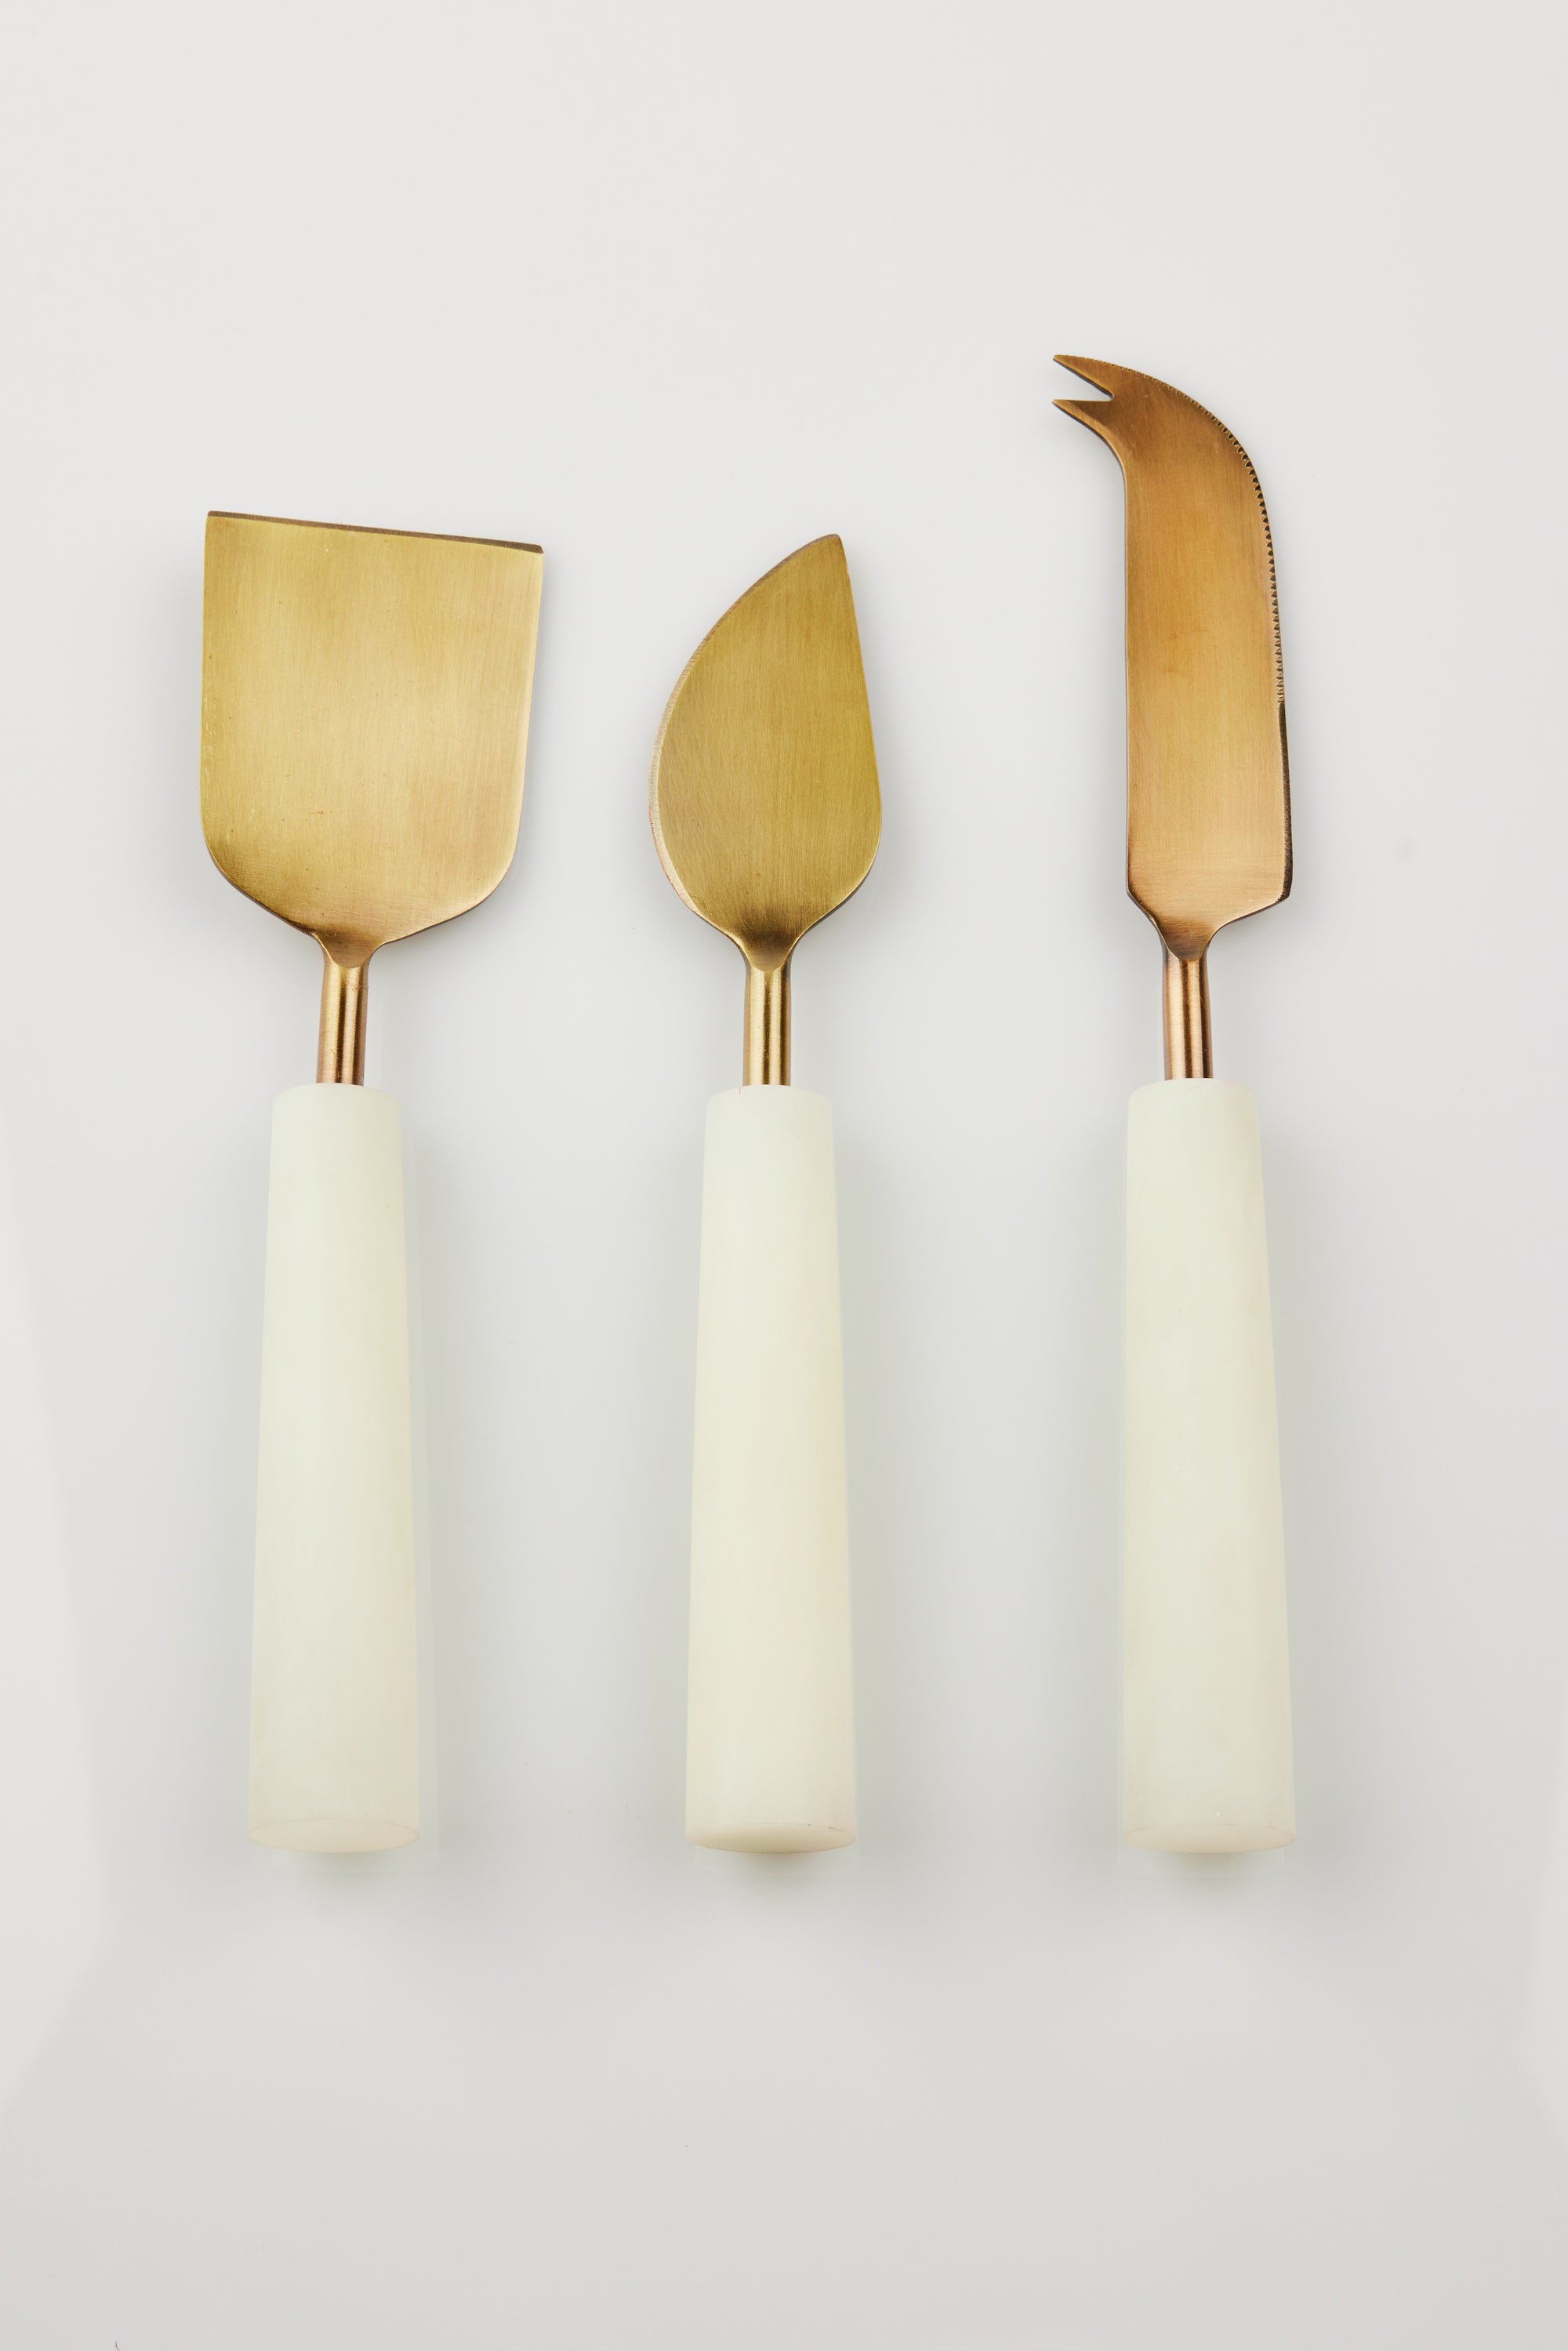 Off White Cheese Knives - Set of 3